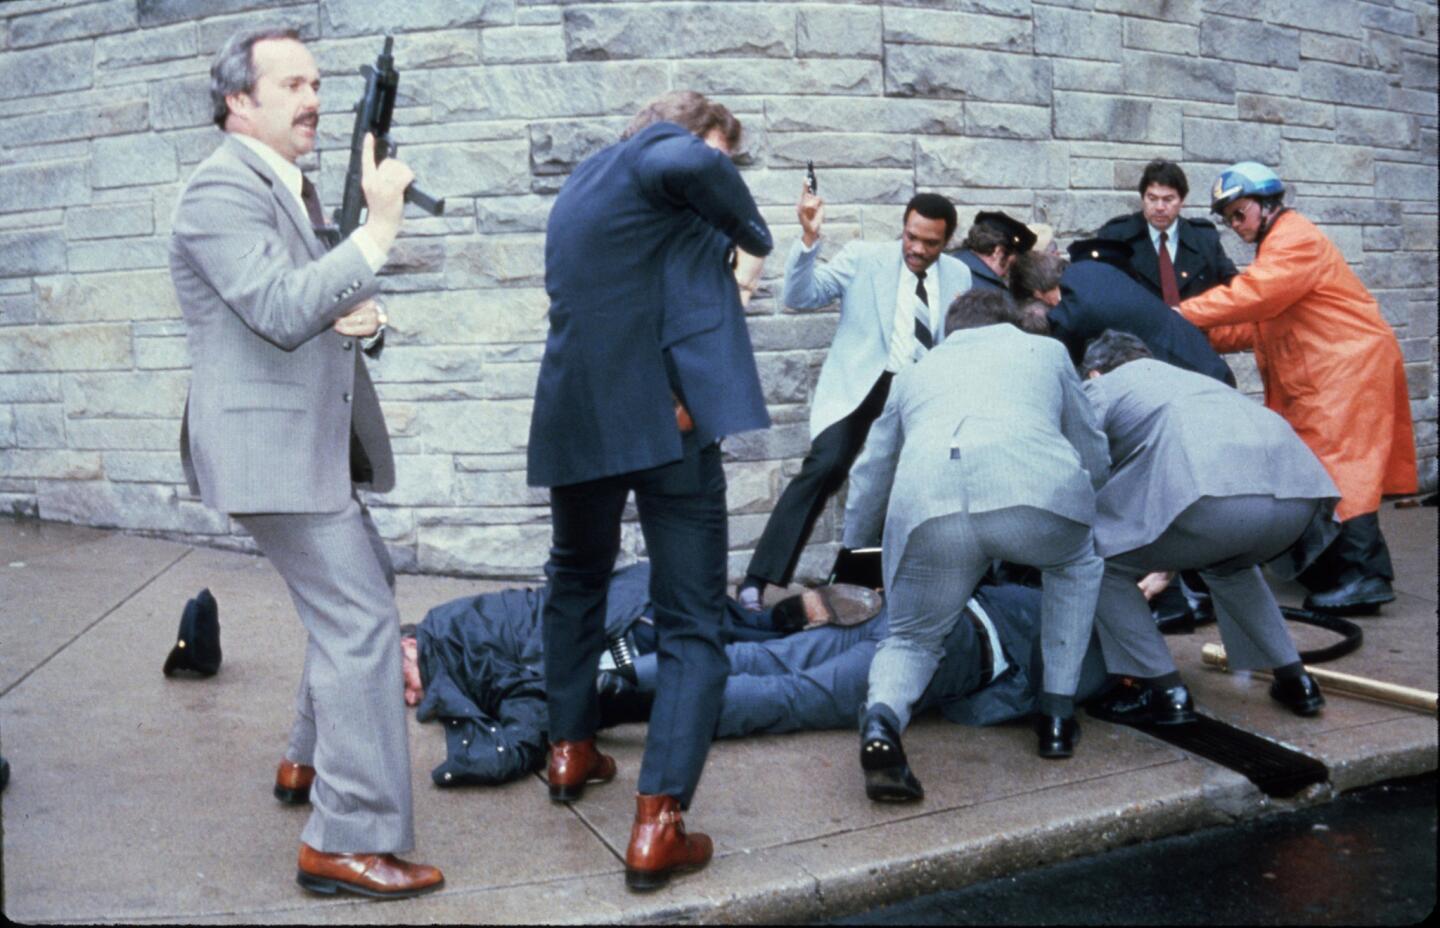 Secret Service agents react after an assassination attempt on President Ronald Reagan on March 30, 1981, by John Hinckley Jr. outside the Hilton Hotel in Washington, D.C. Also wounded in the shooting were press secretary James Brady, Secret Service Agent Tim McCarthy and D.C. police Officer Thomas Delahanty. Hinckley was found not guilty by reason of insanity in 1982 and placed in a mental health care facility.